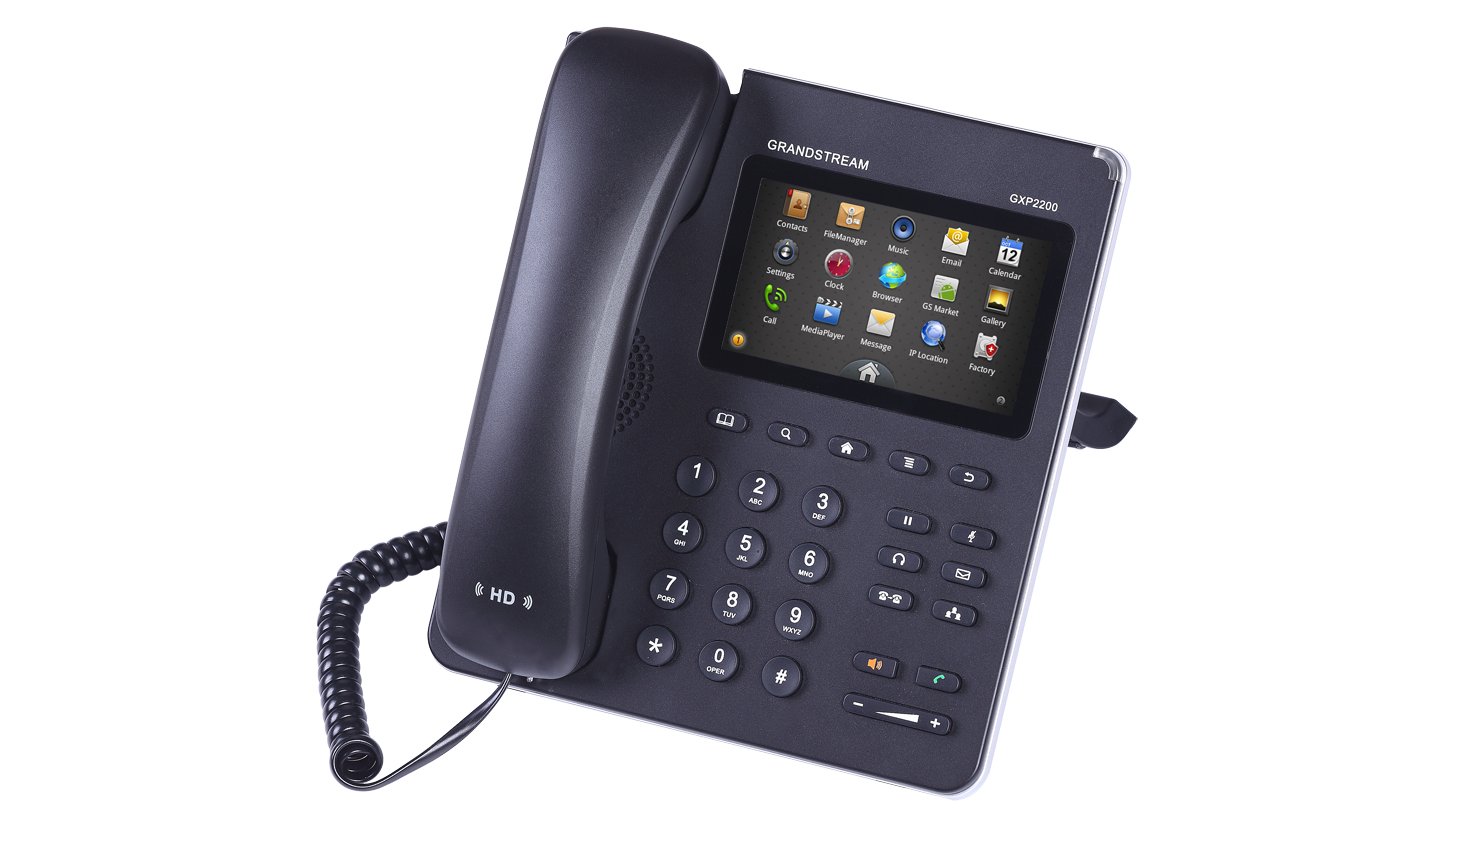 Grandstream GXP2200 AndroidTM desktop IP phone with version 2.3OS, 4.3 inch capacitive touchscreen LCD and supports 6 SIP accounts